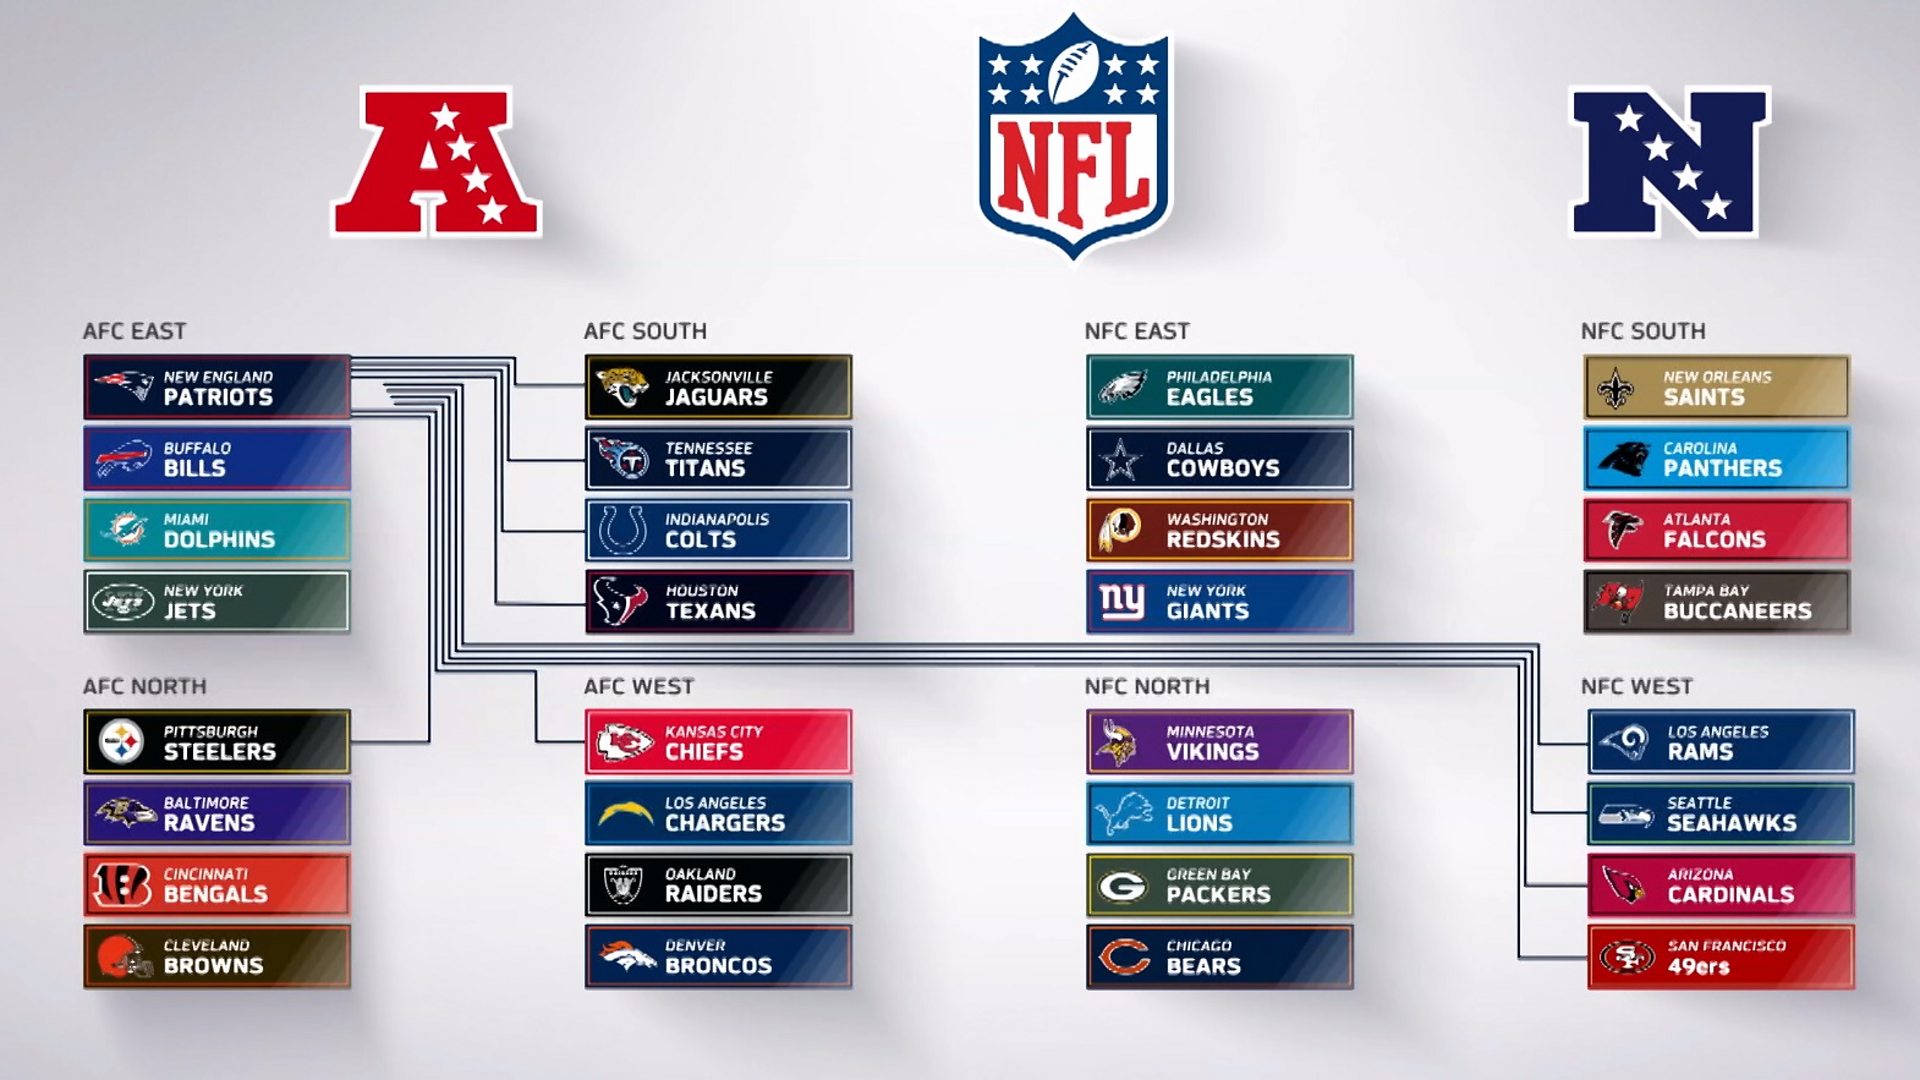 Difference Between NFC and AFC  Compare the Difference Between Similar  Terms